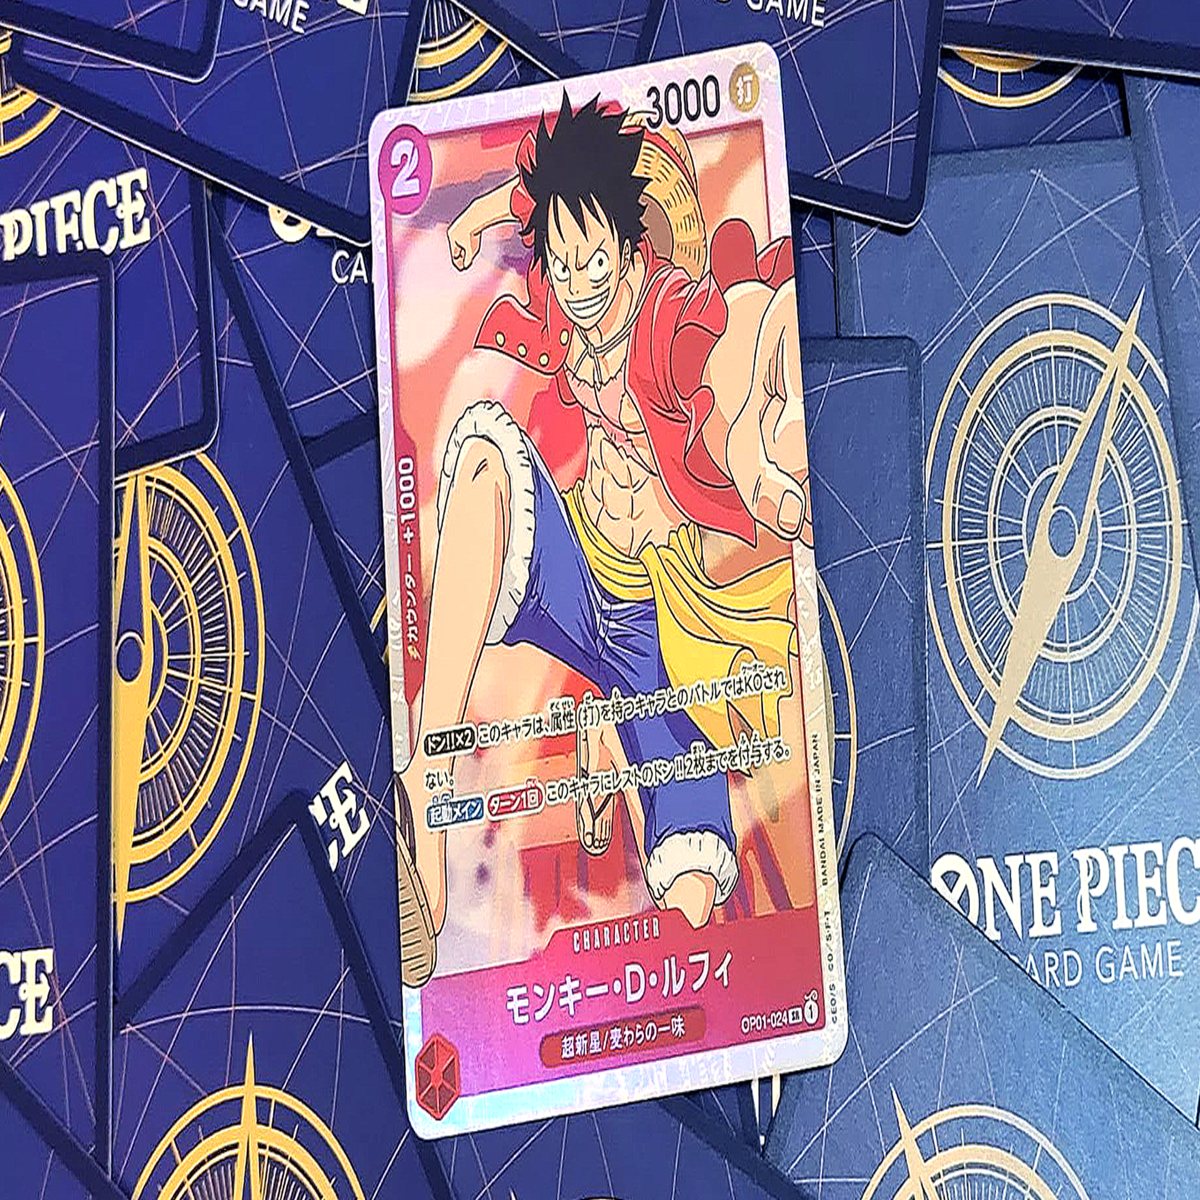 One Piece Card Game: Basic Rules!